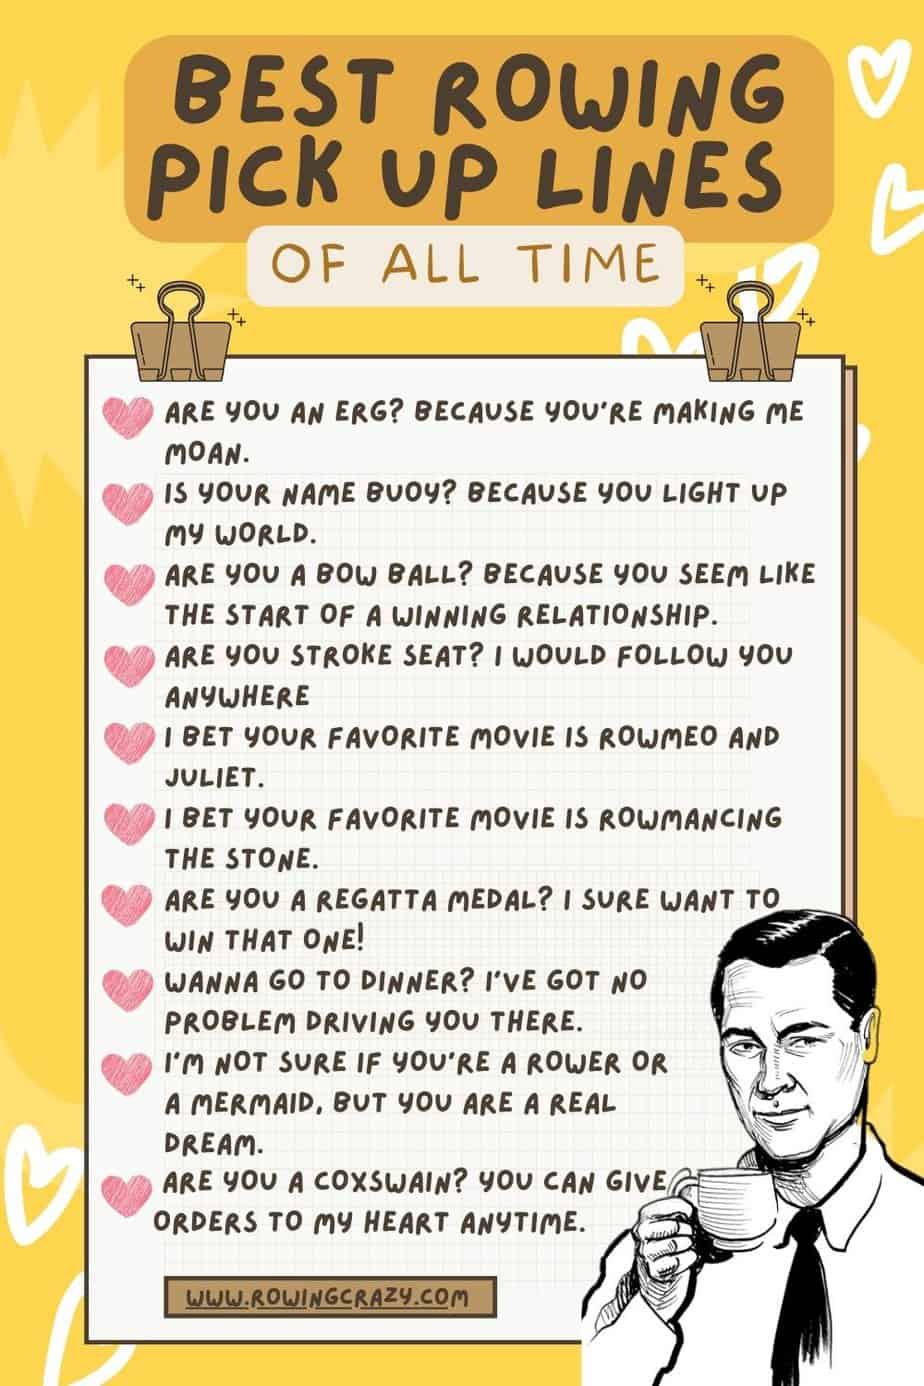 Best Rowing Pick Up Lines of All Time